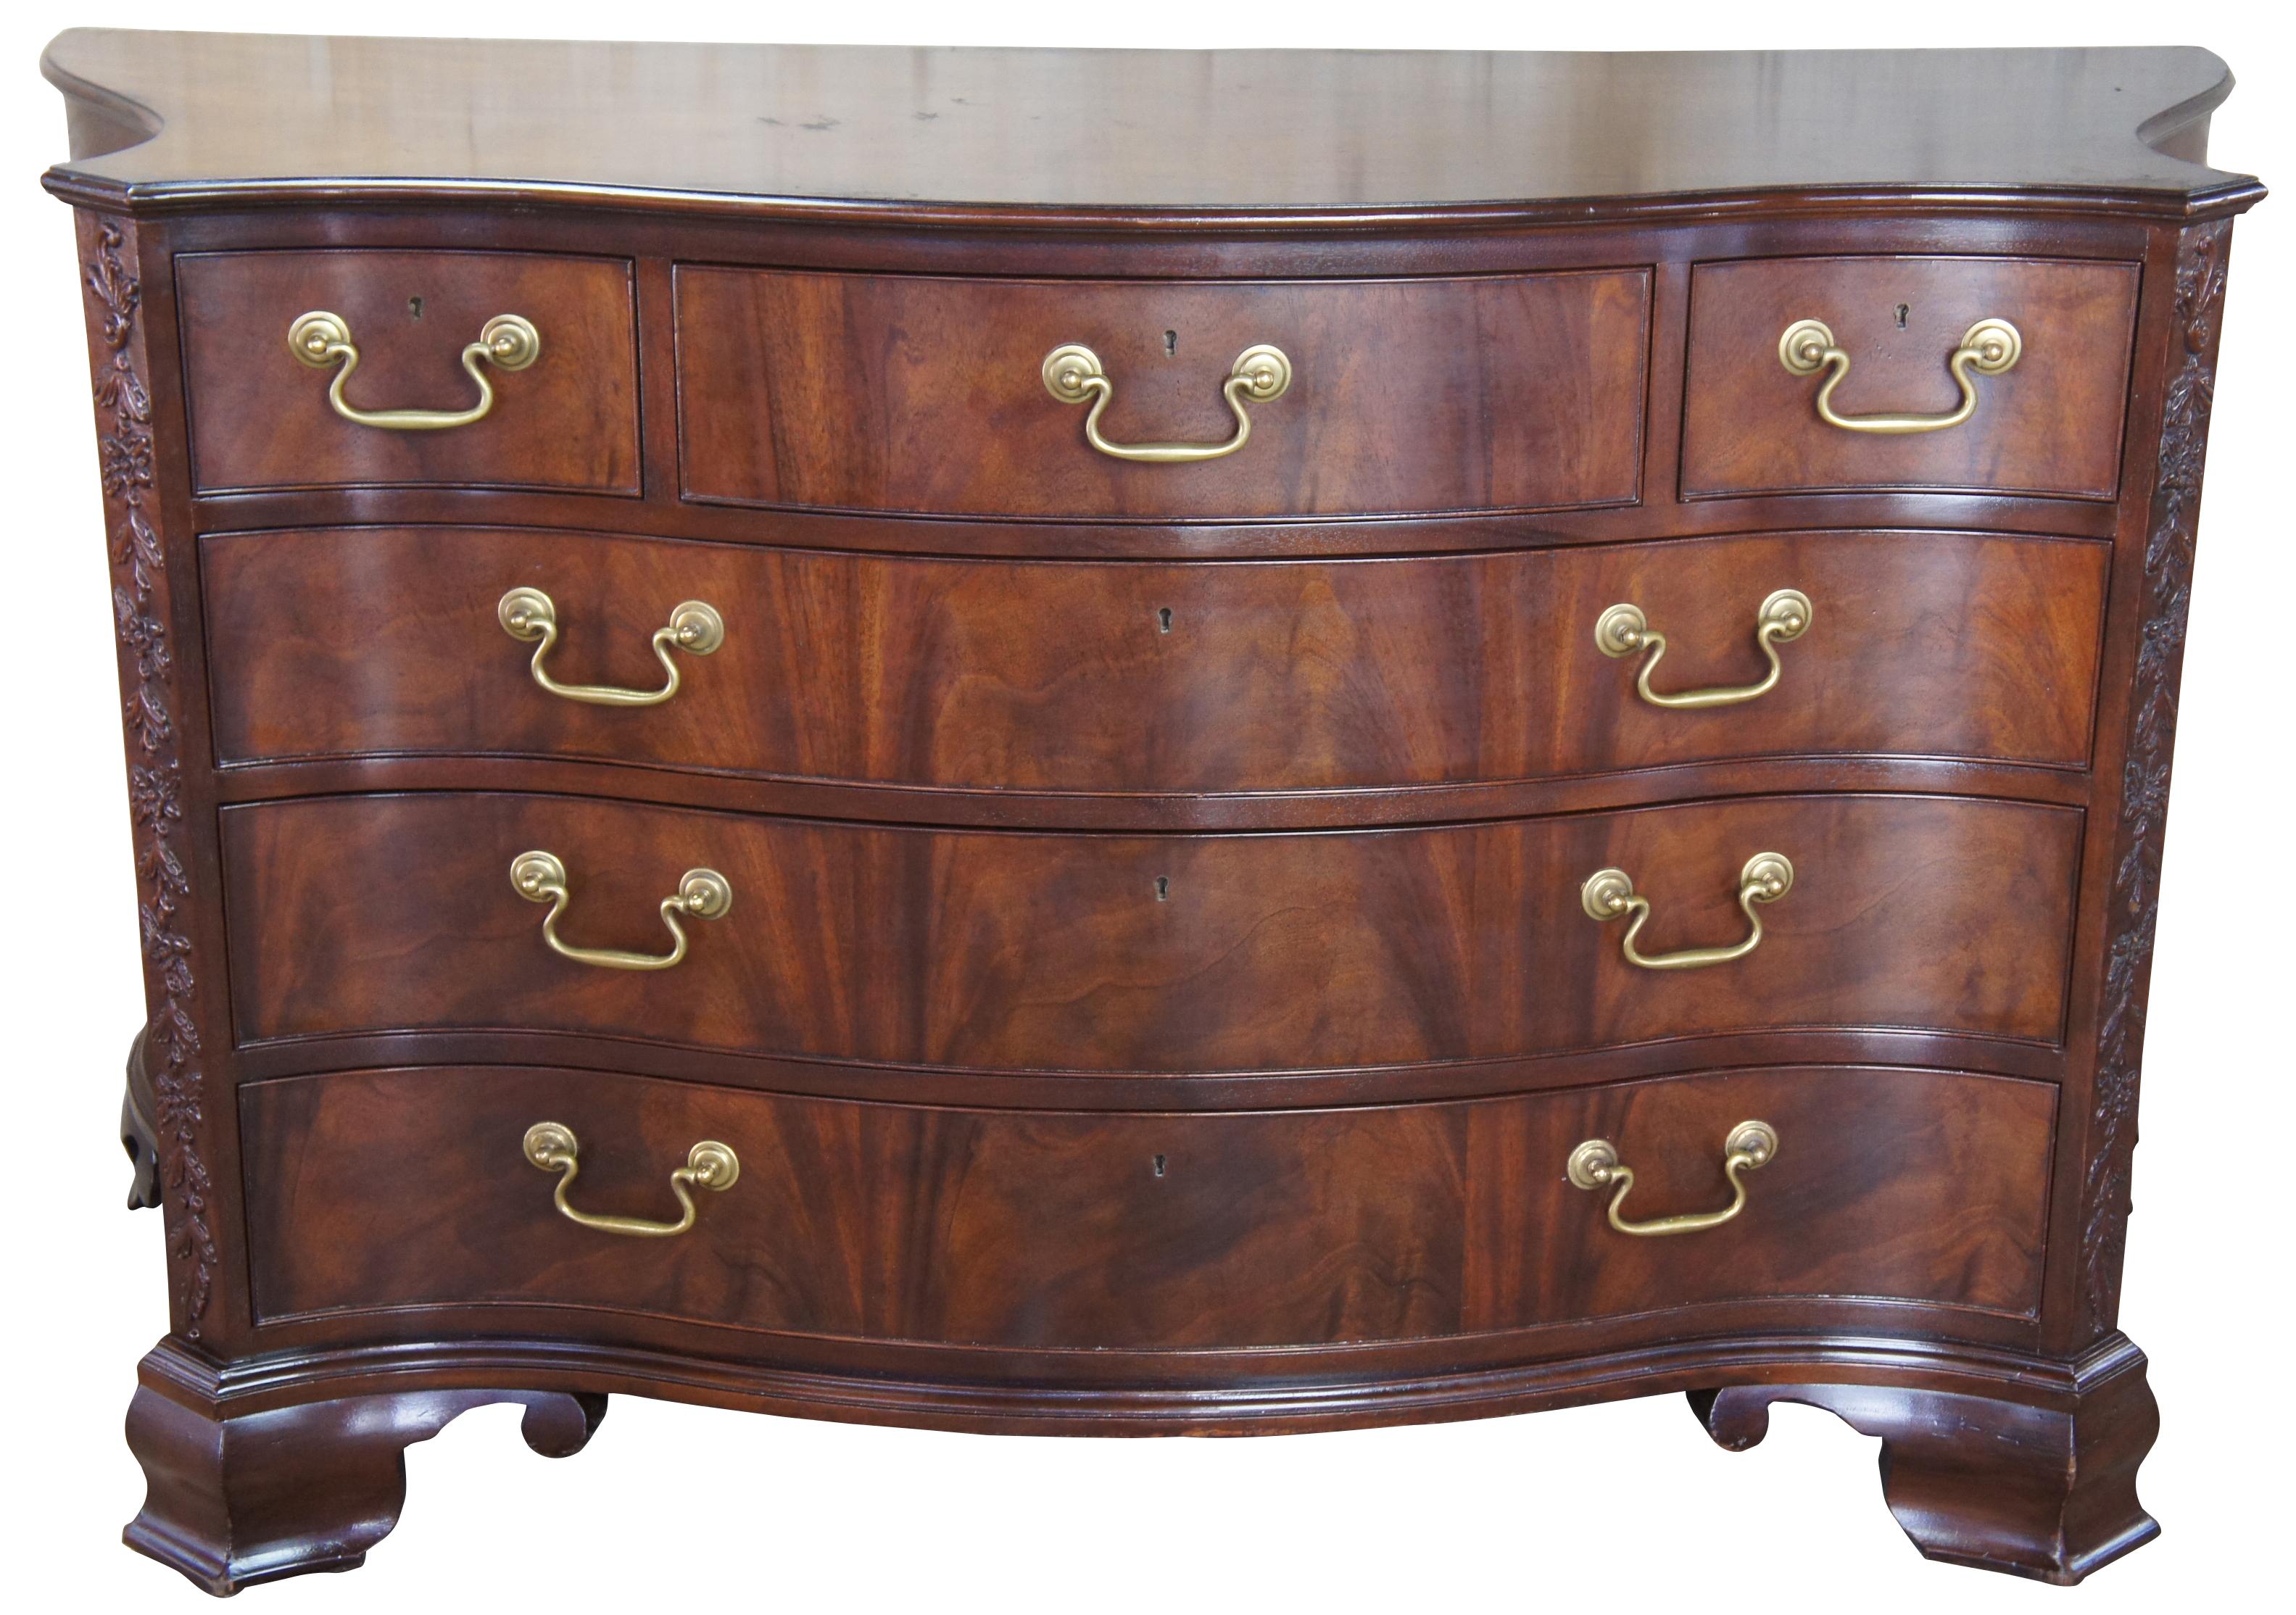 Baker Stately Homes Chippendale serpentine mahogany bachelor’s chest dresser

Baker Stately Homes serpentine chest. A fine Chippendale serpentine carved mahogany chest, with moulded border to the shaped top, fitted with three short drawers and